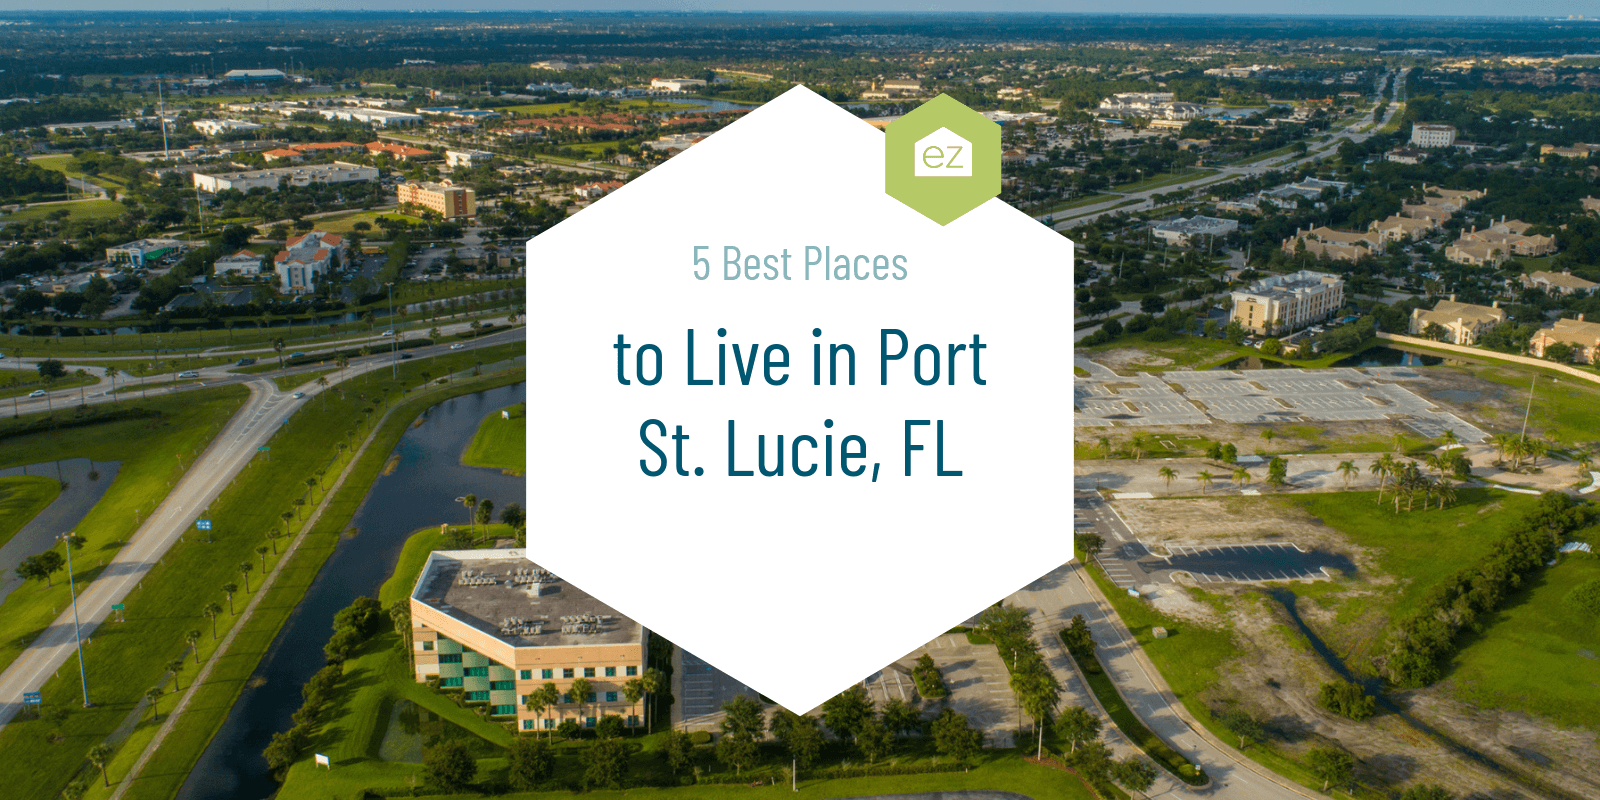 5 Best Places to Live in Port St Lucie FL